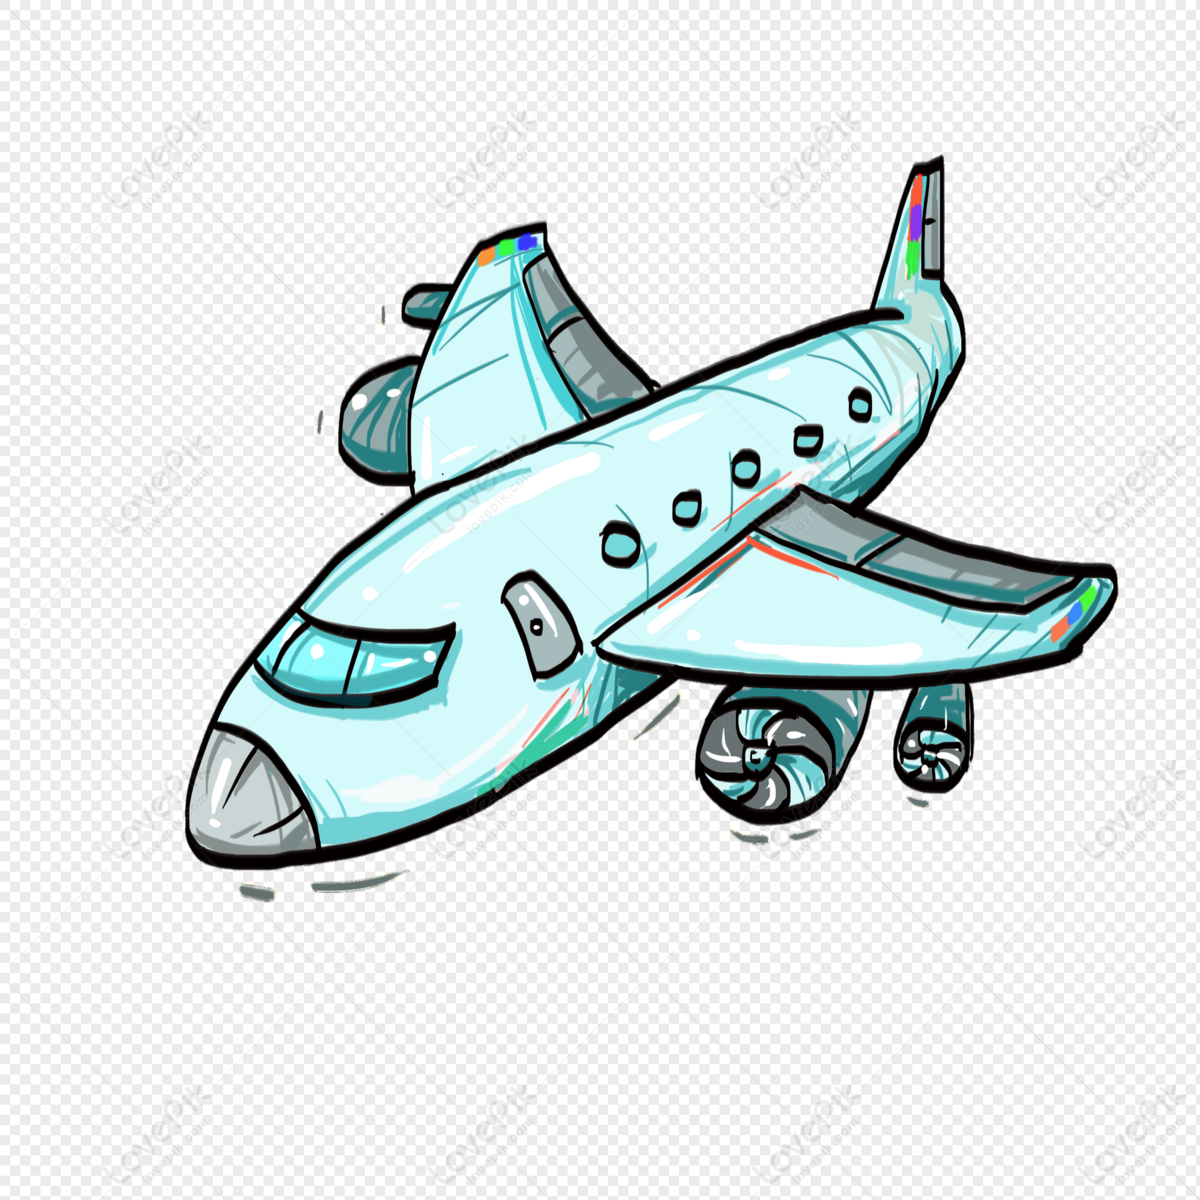 Cartoon Airplane Images, HD Pictures For Free Vectors Download 